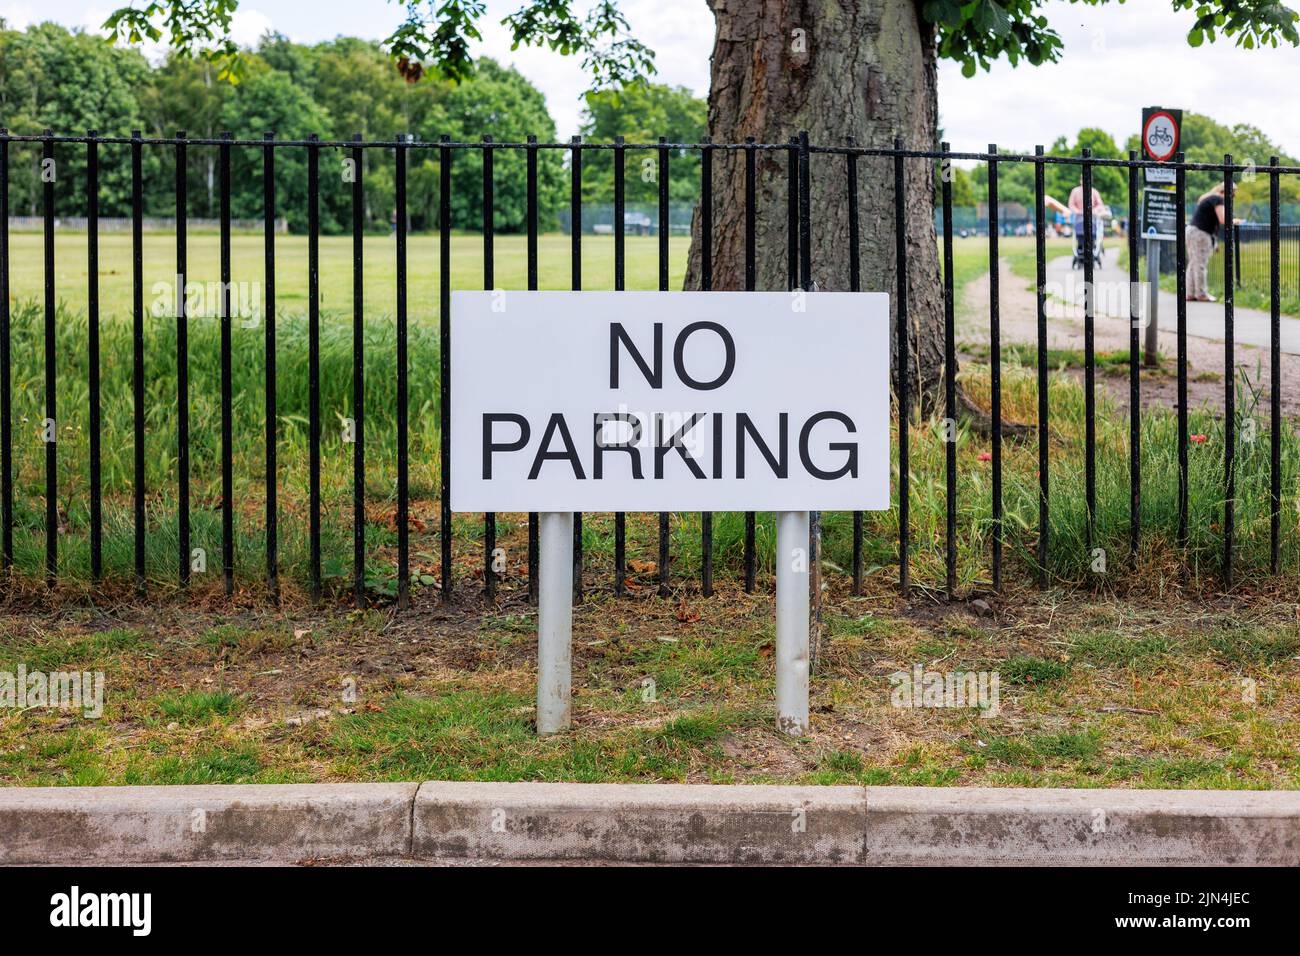 No Parking sign outside of a public park in the UK Stock Photo